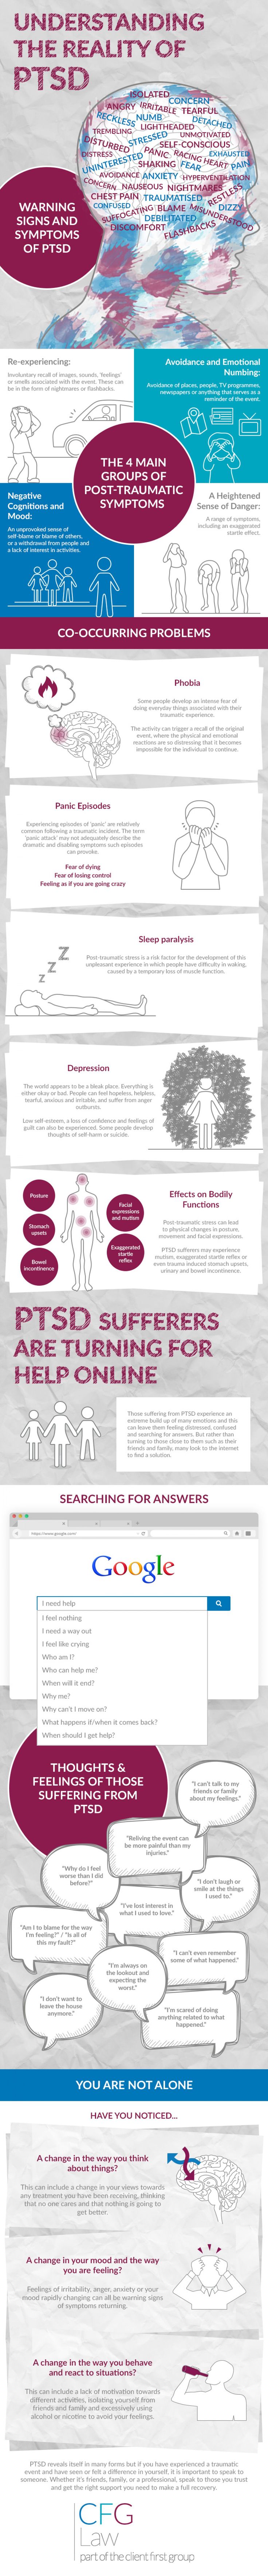 Psychology-Infographic-Understanding-the-Reality-of-Post-Traumatic-Stress-Disorder-Infographic Psychology Infographic : Understanding the Reality of Post-Traumatic Stress Disorder Infographic